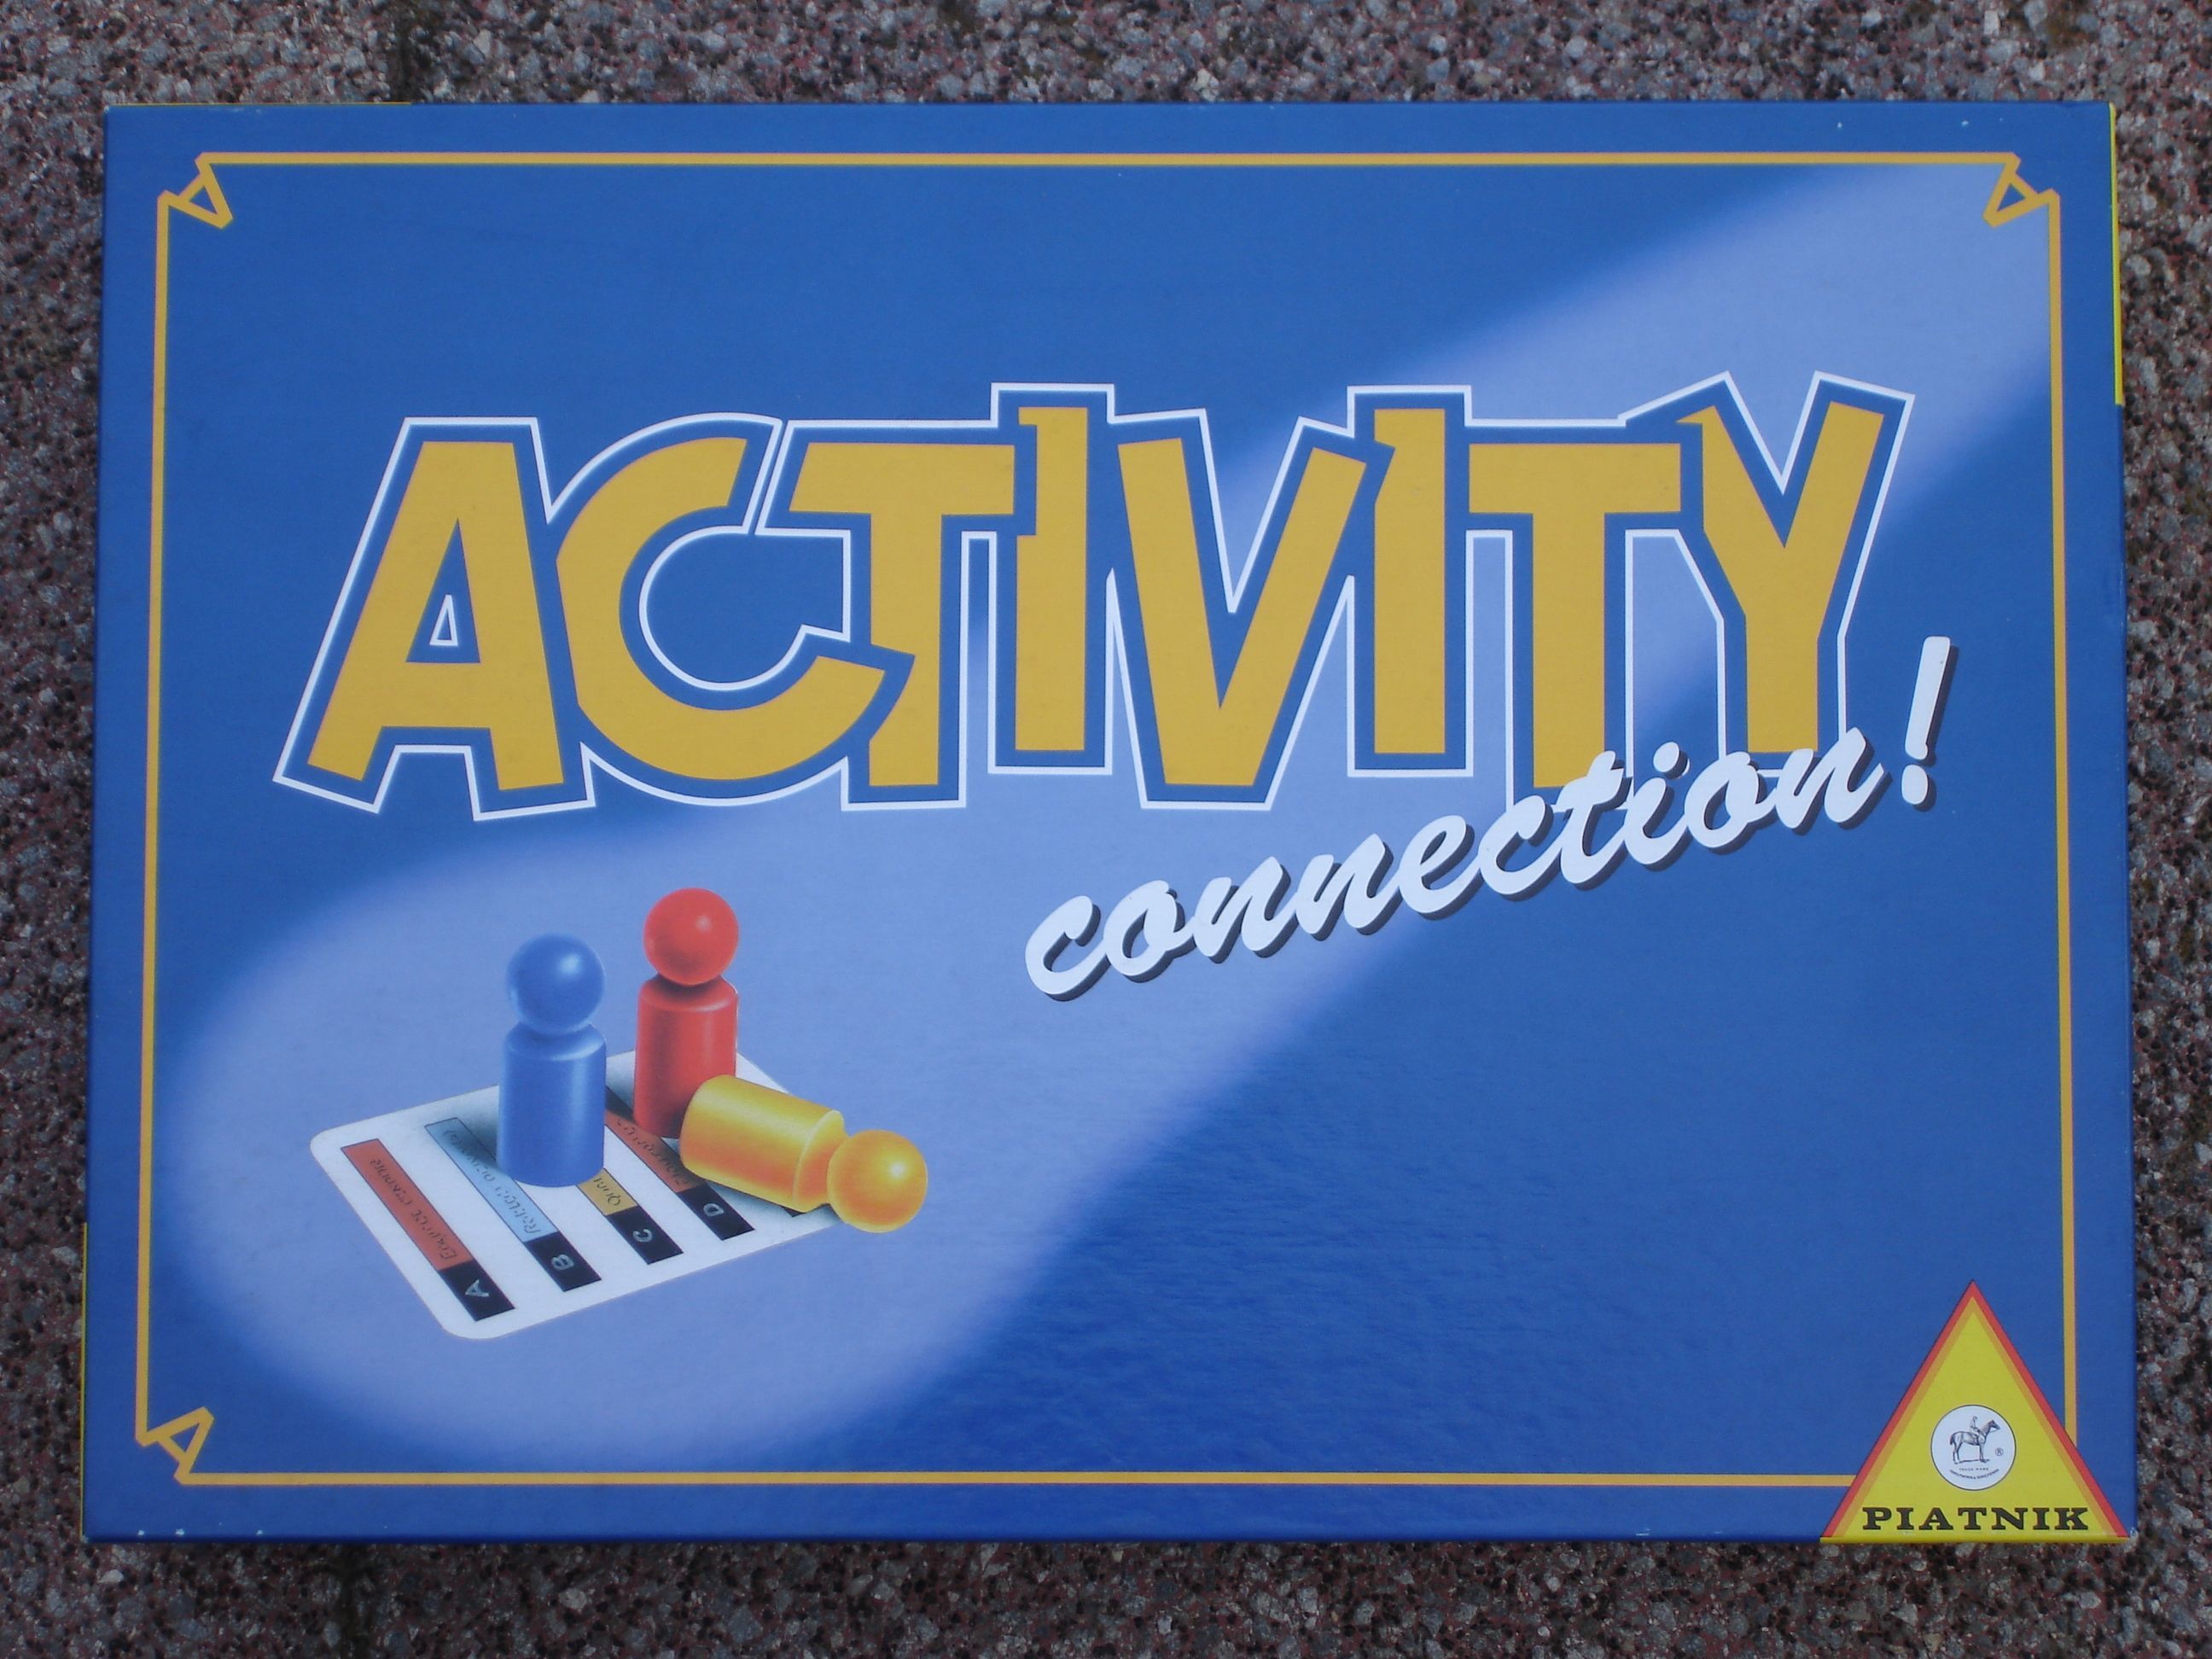 Activity connection!